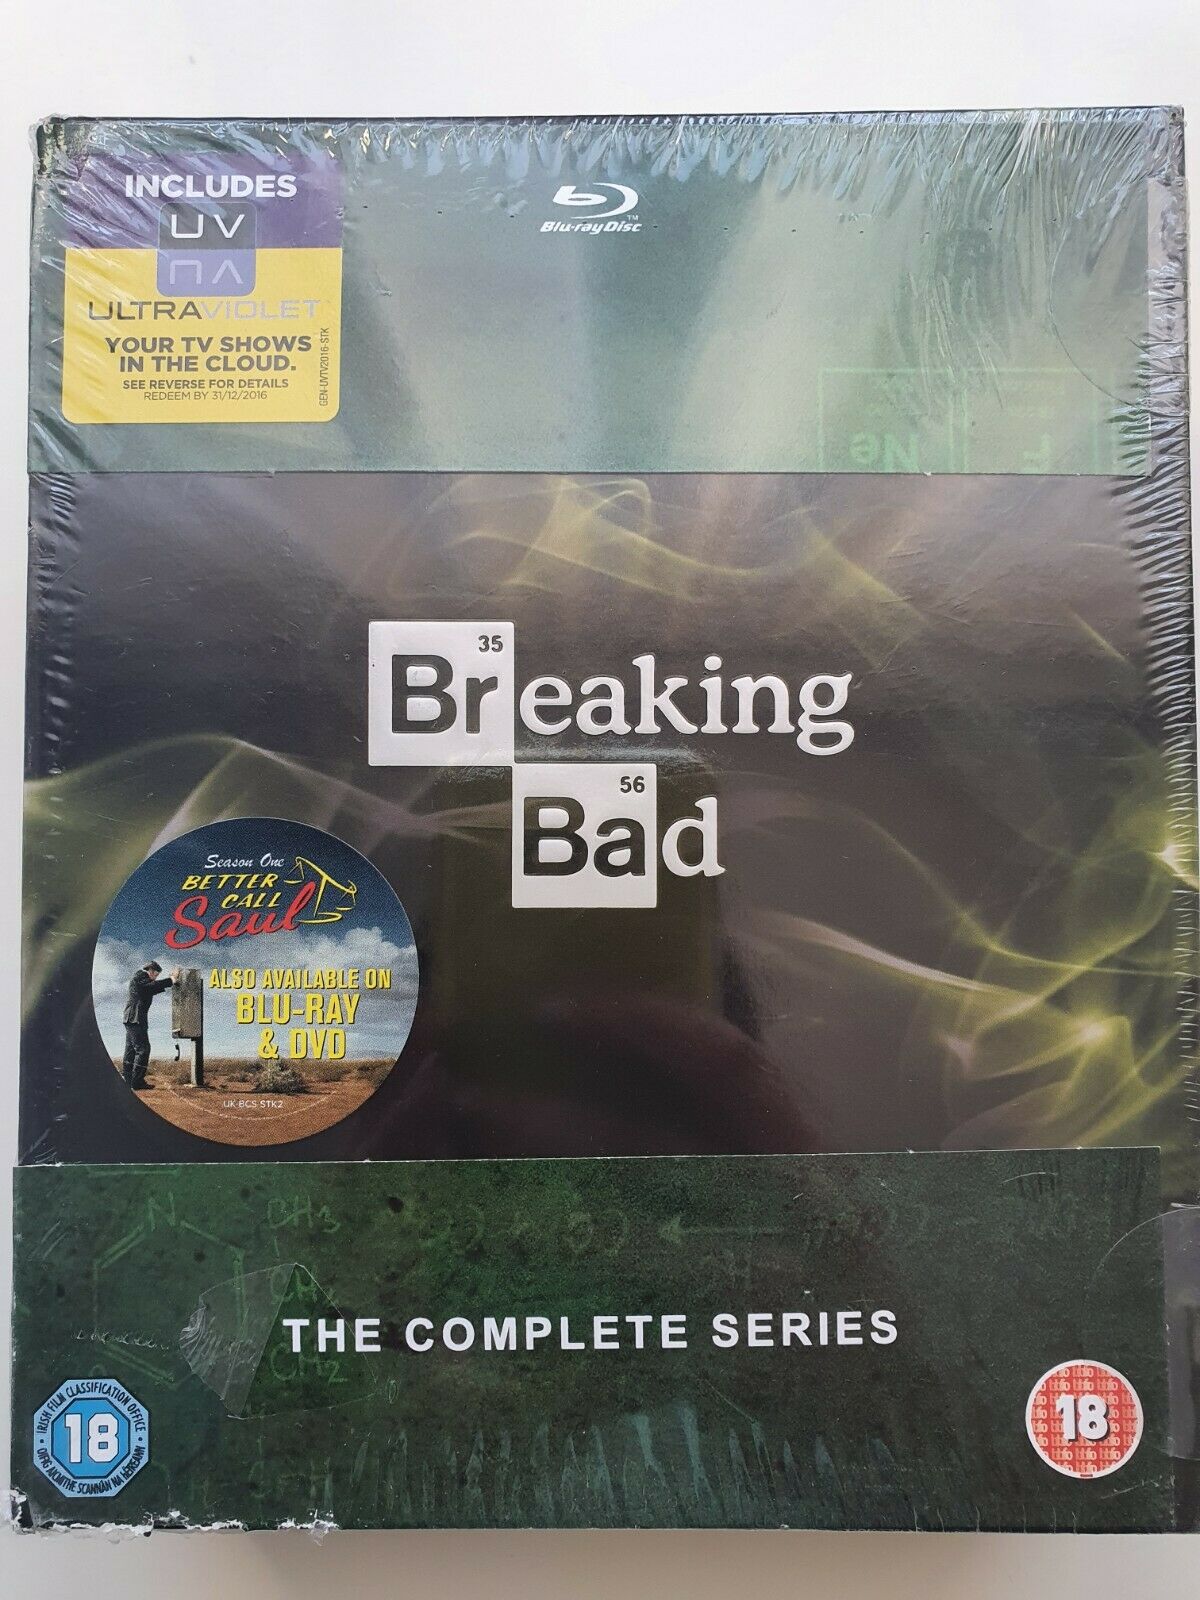 5035822106819 Breaking Bad  The Complete Series 1 - 5 DVD + UV 2013 English BOX SET NEW SEALED